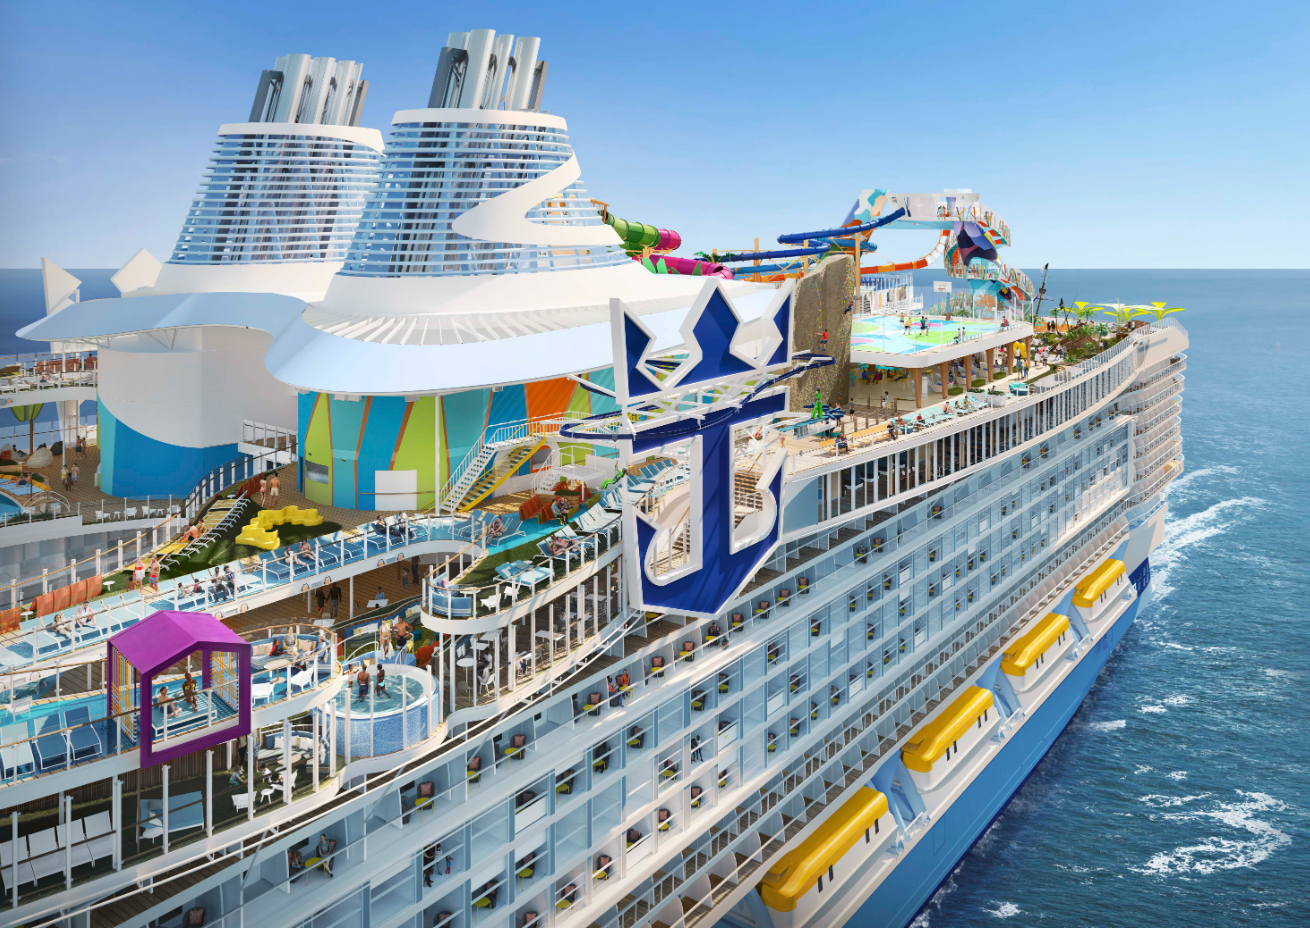 The first steps on the worlds largest cruise ship: is Icon of the Seas the ultimate family vacation?